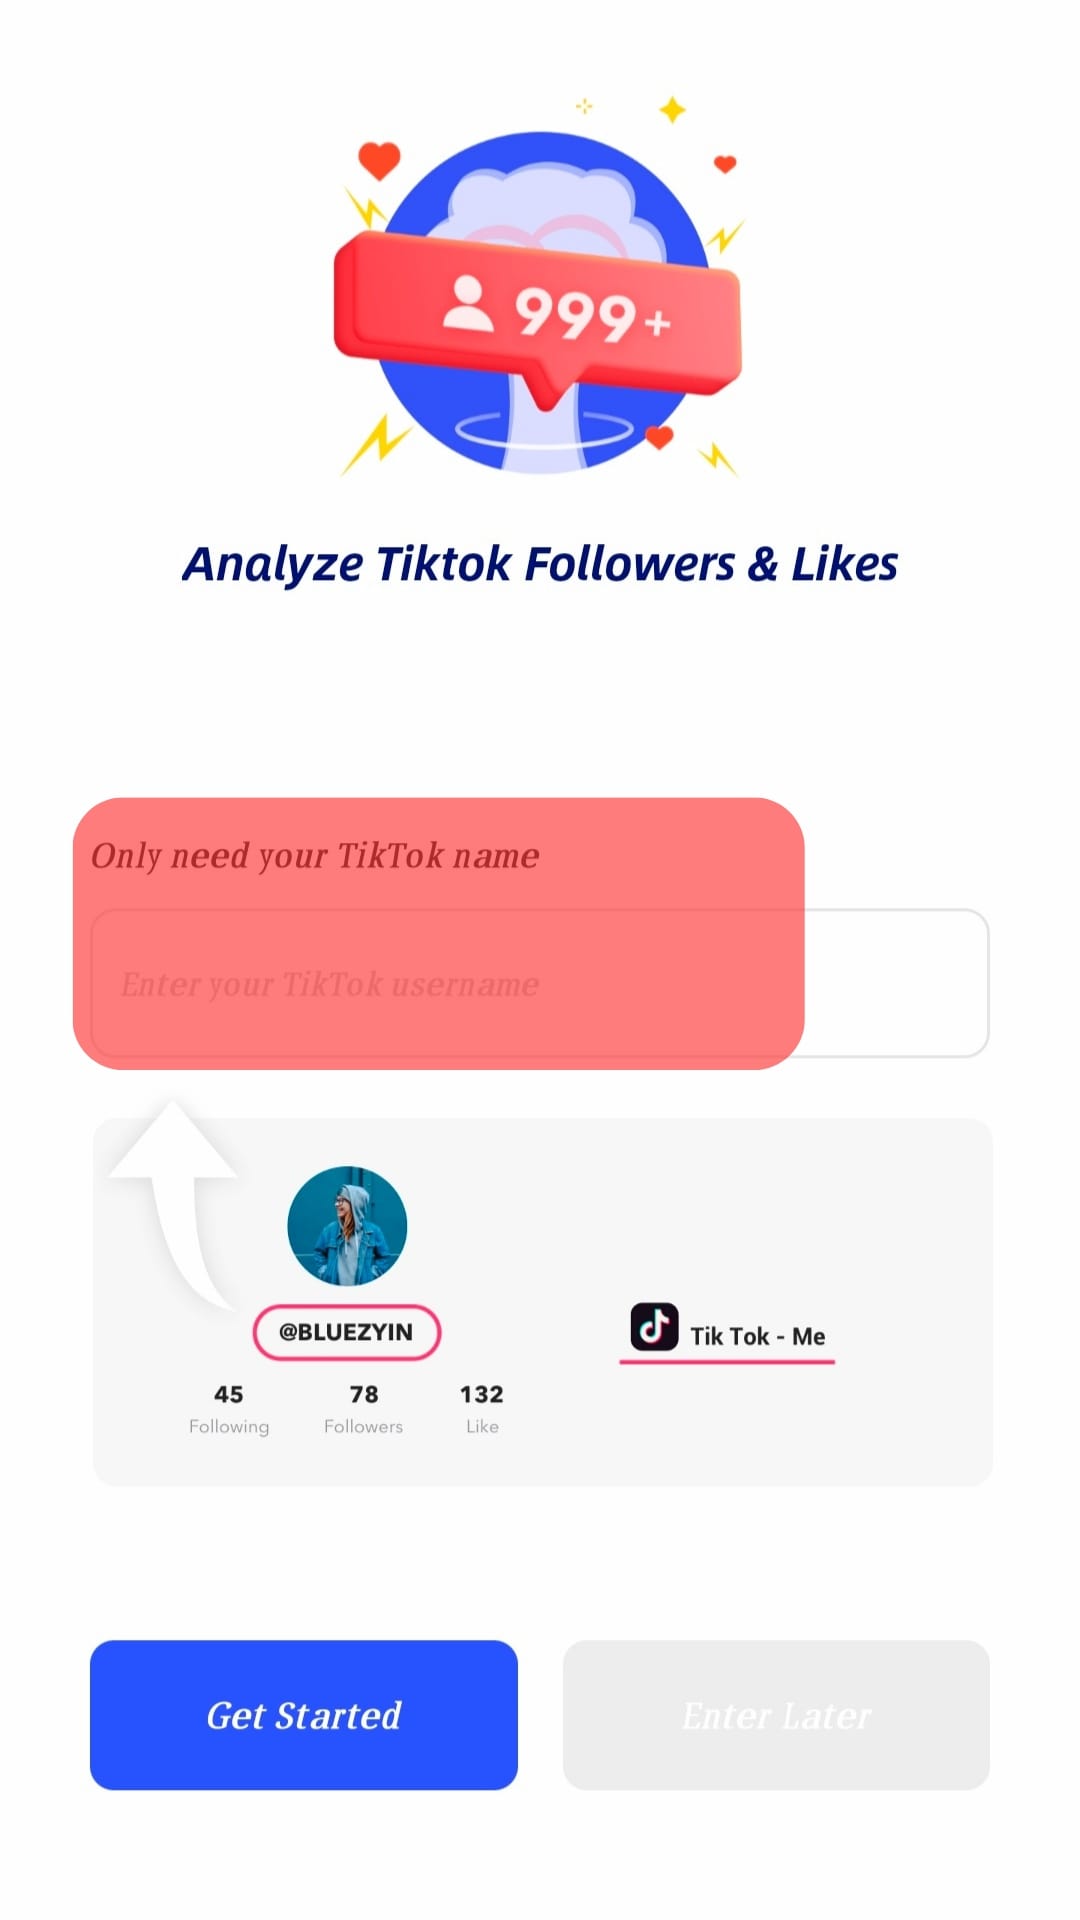 Download The App And Enter Your Tiktok Credentials